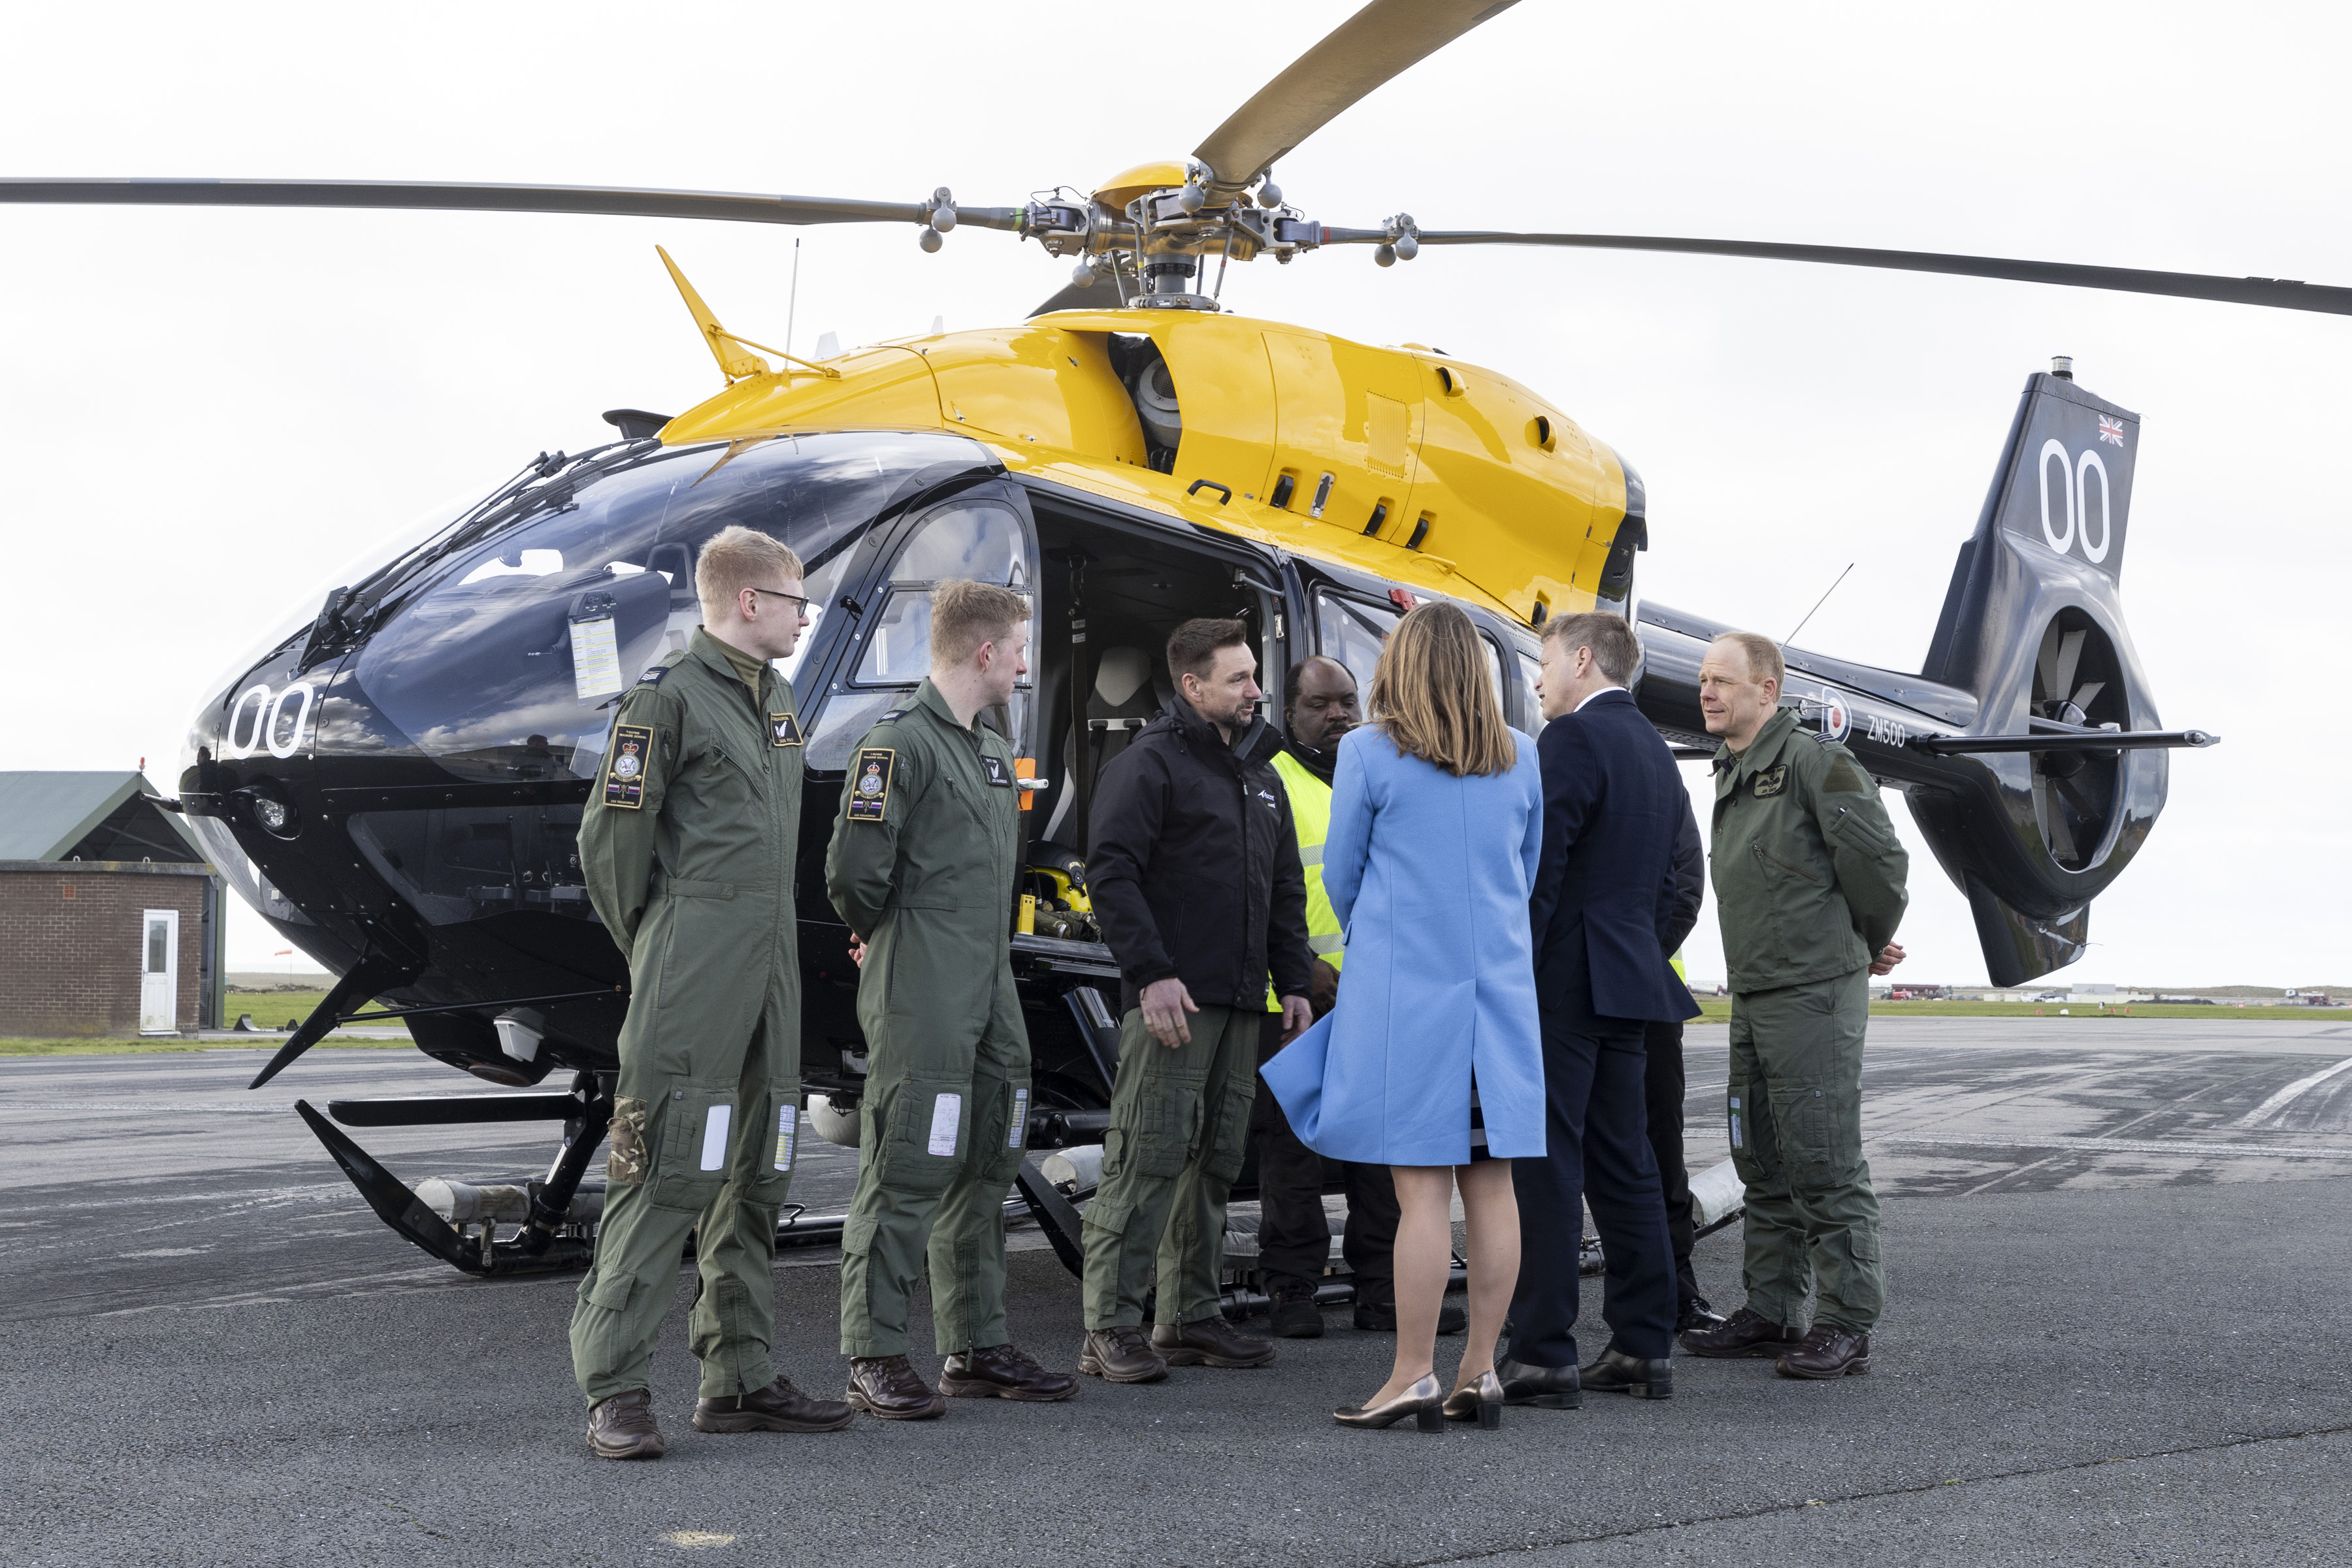 Defence Secretary Grant Shapps chats to group of personnel next to a helicopter on the runway